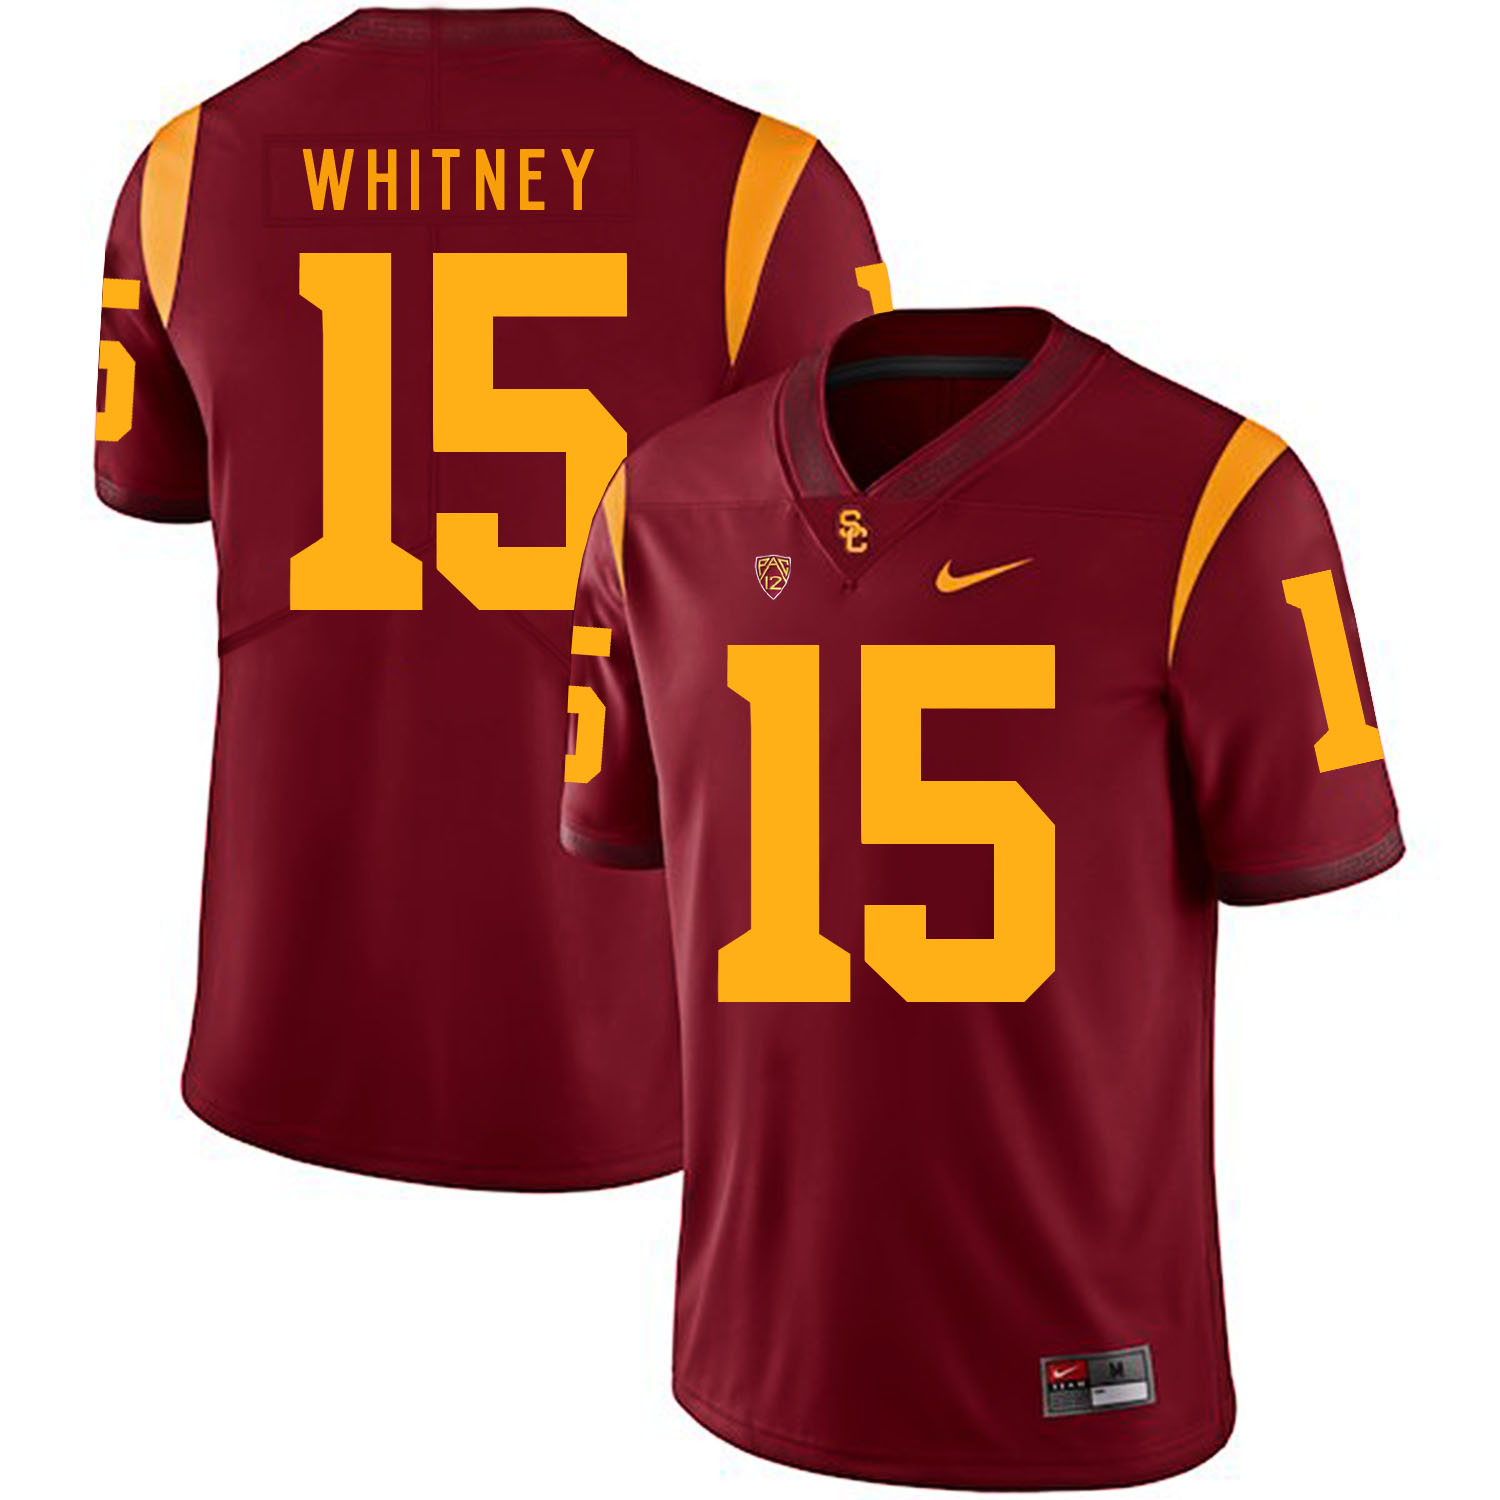 USC Trojans 15 Isaac Whitney Red College Football Jersey